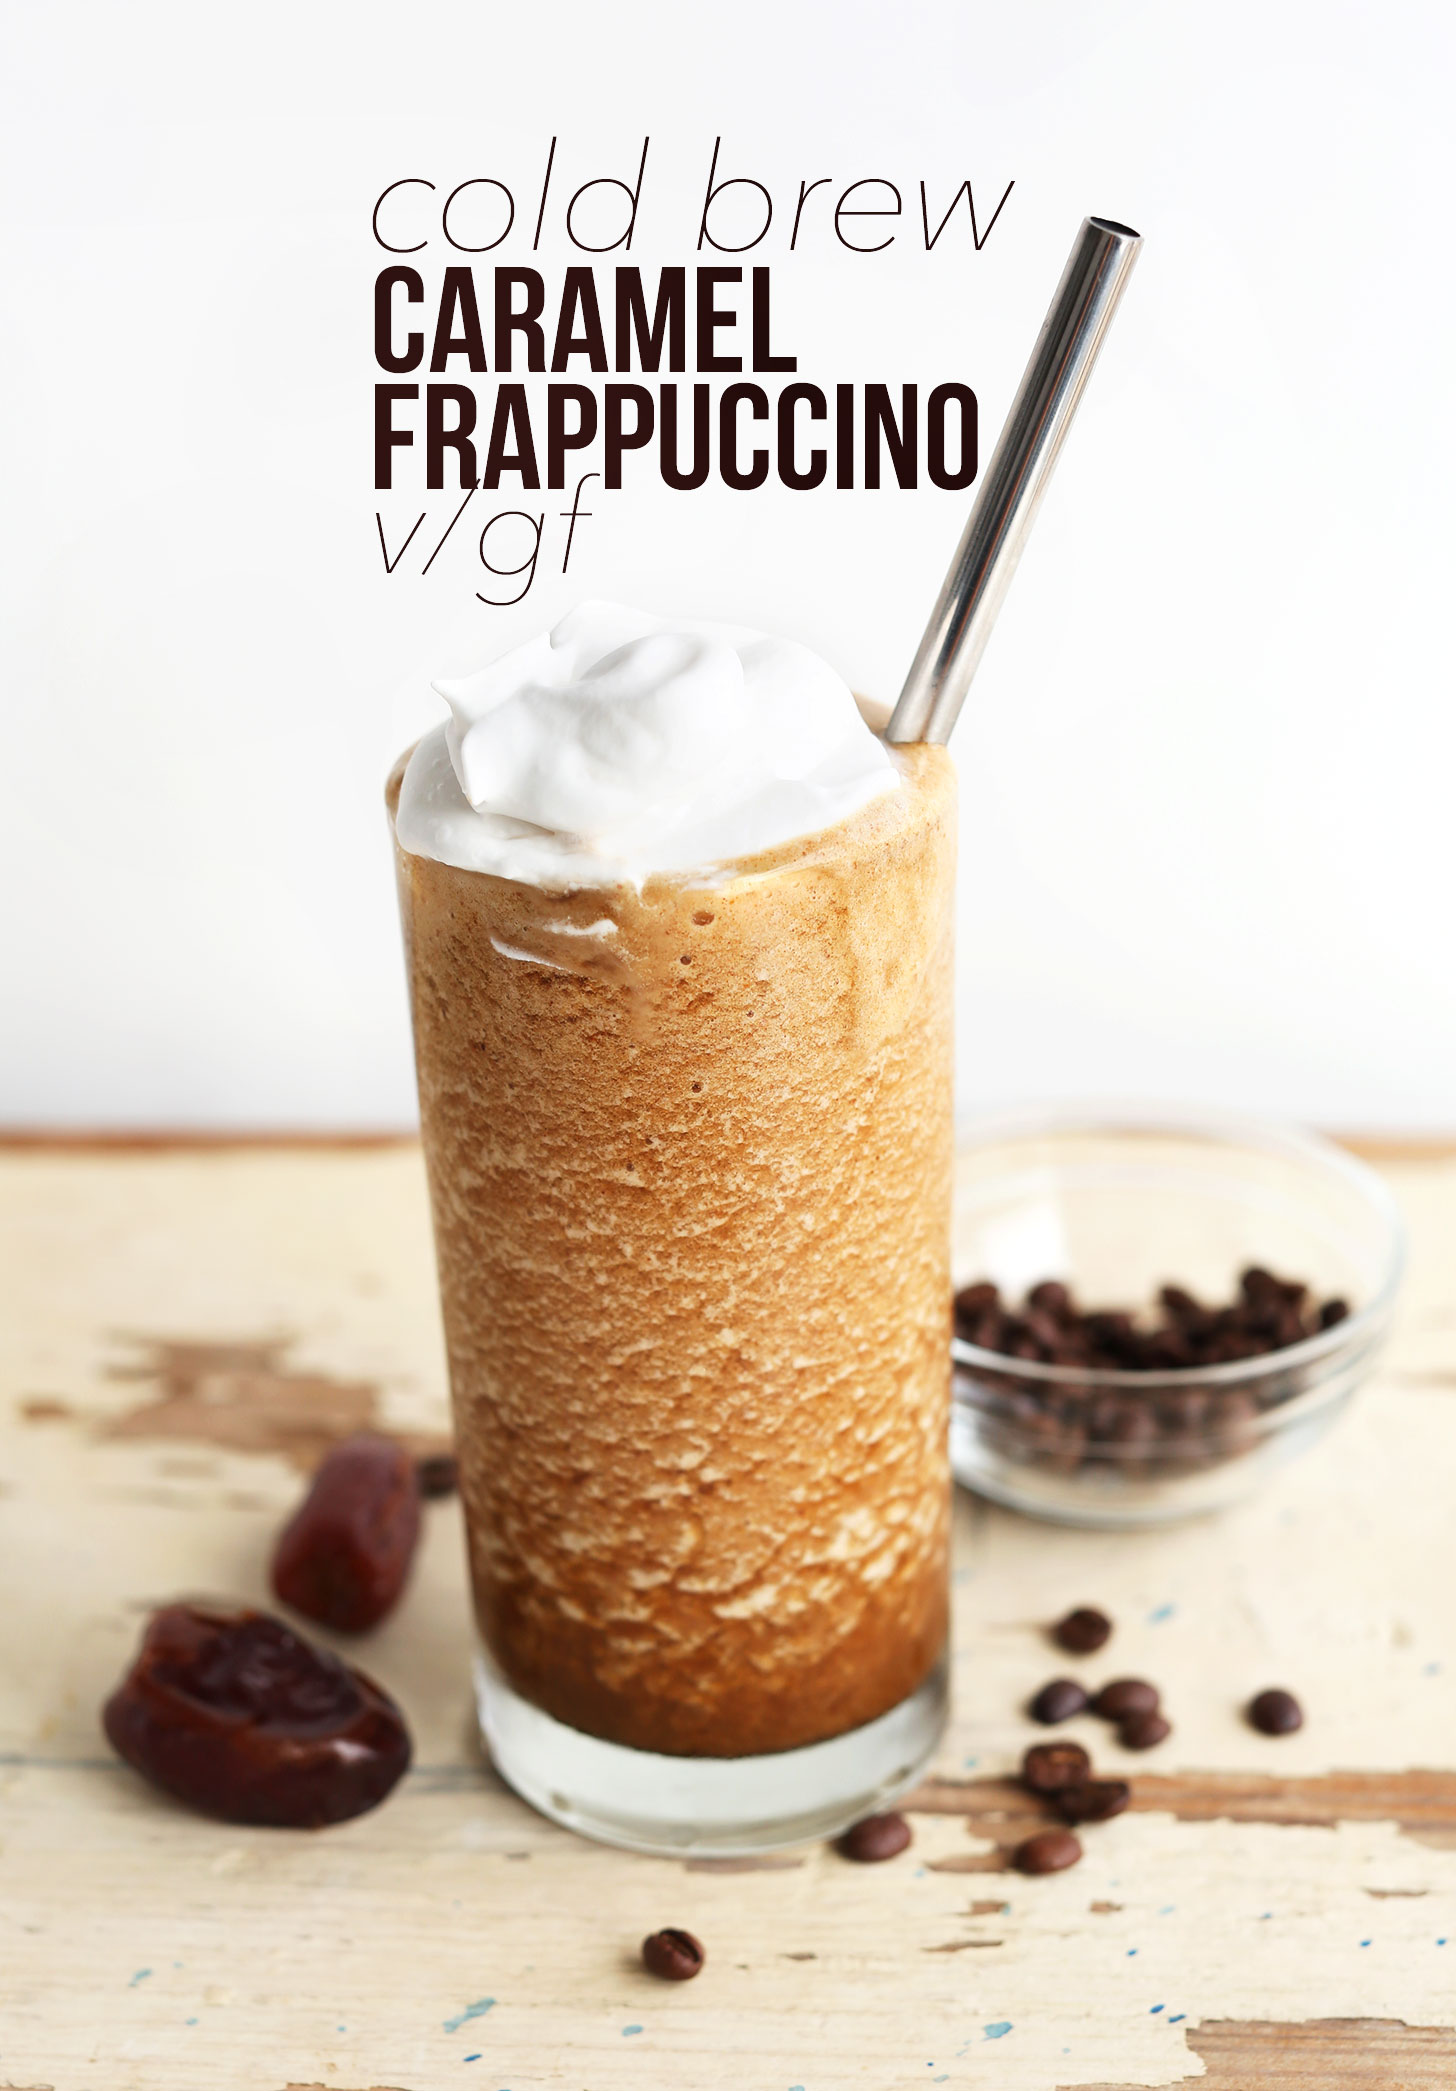 Large glass of our vegan cold brew Caramel Frappuccino topped with coconut whipped cream